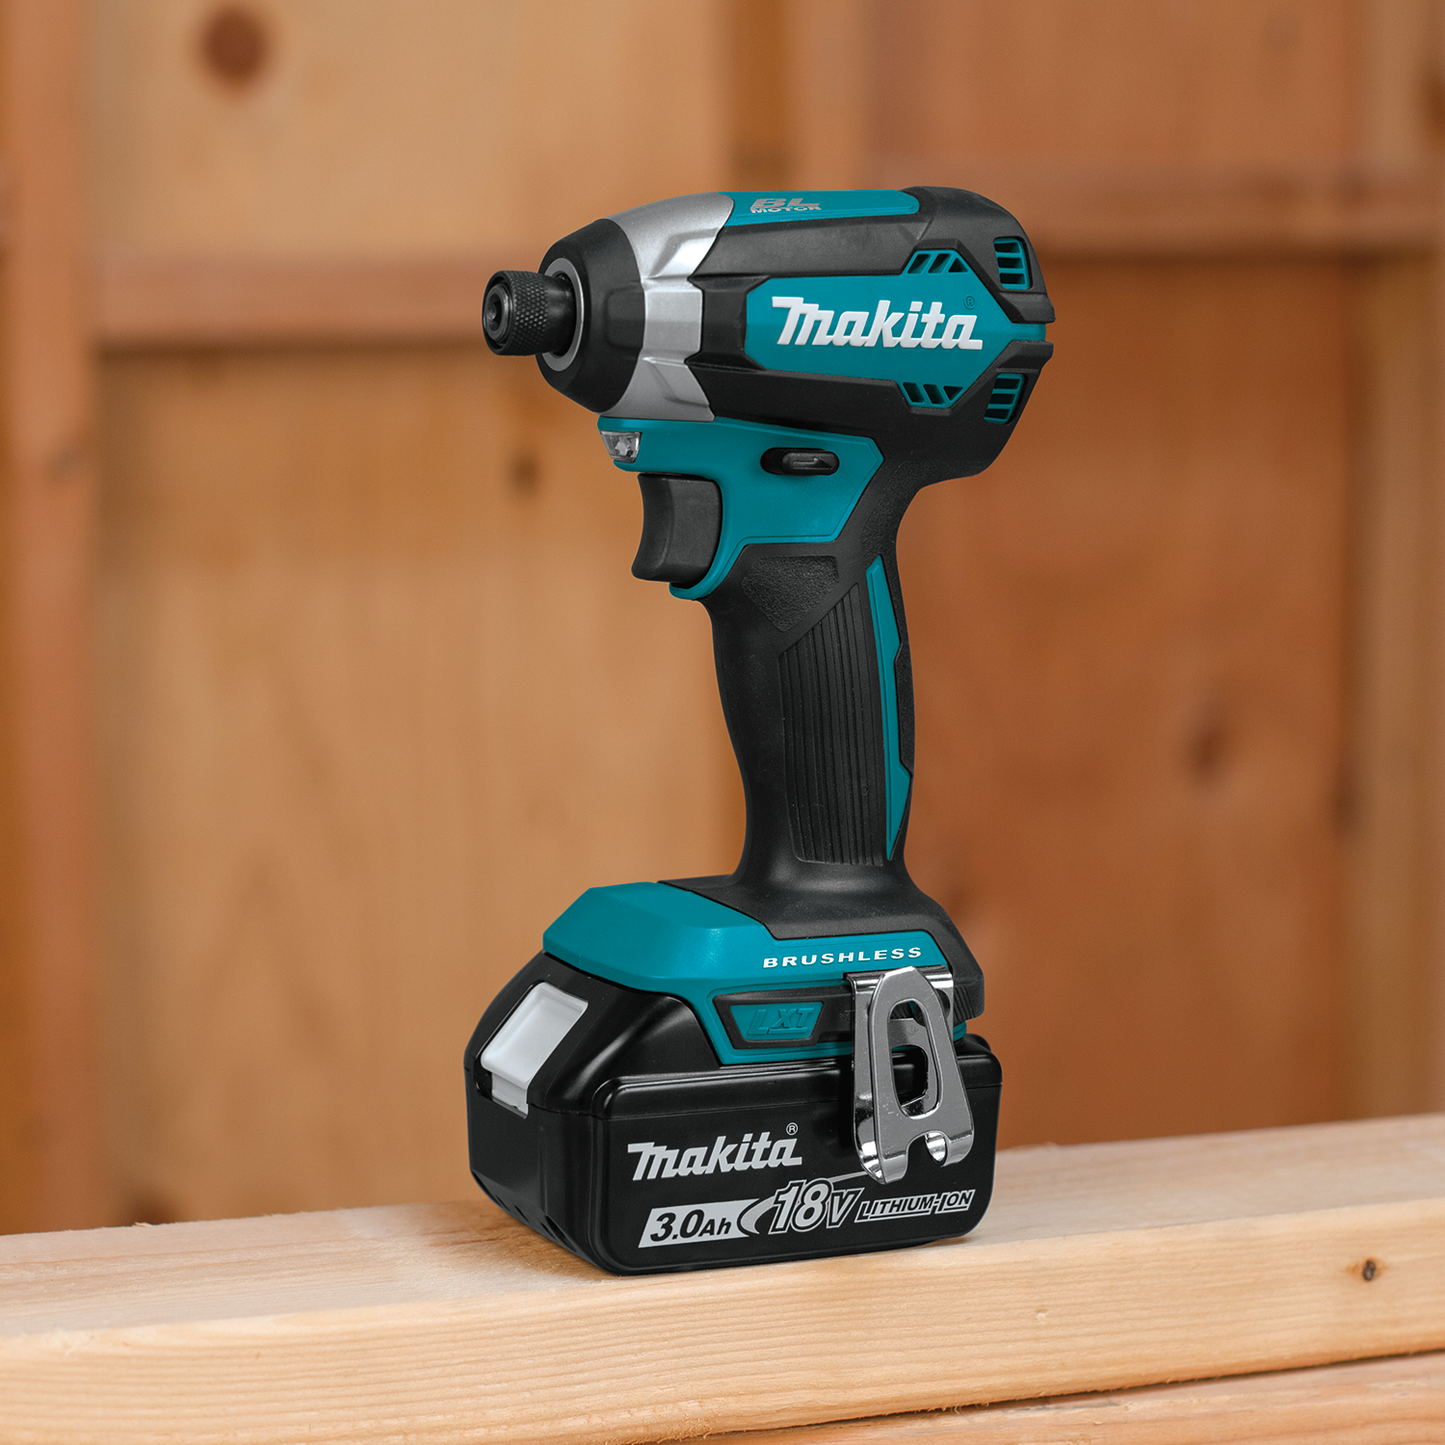 Makita 18 Volt Lxt Brushless Cordless Impact Driver With Bag Factory Serviced